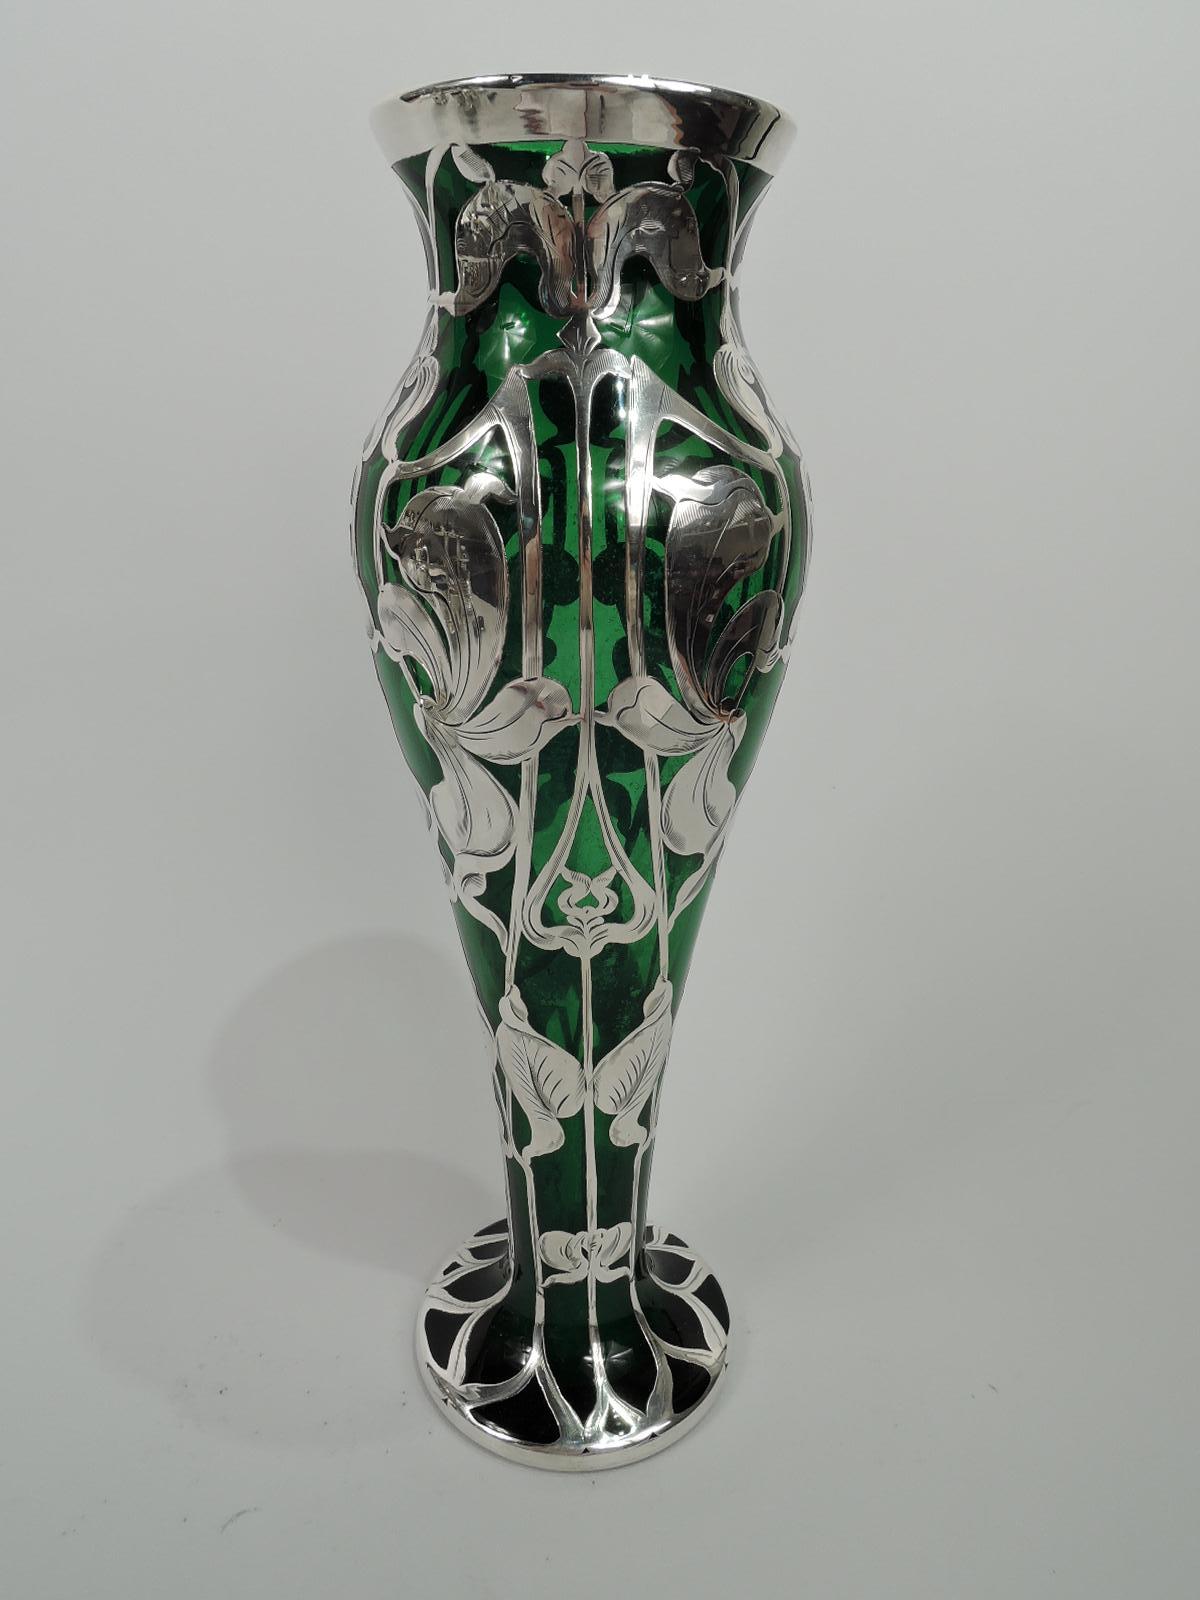 Turn-of-the-century American Art Nouveau glass vase with engraved silver overlay. Tall baluster flowing into round foot; flared mouth. Overlay in form of vertical pattern with loose blooms and curvilinear trellis-style tendrils that flow into